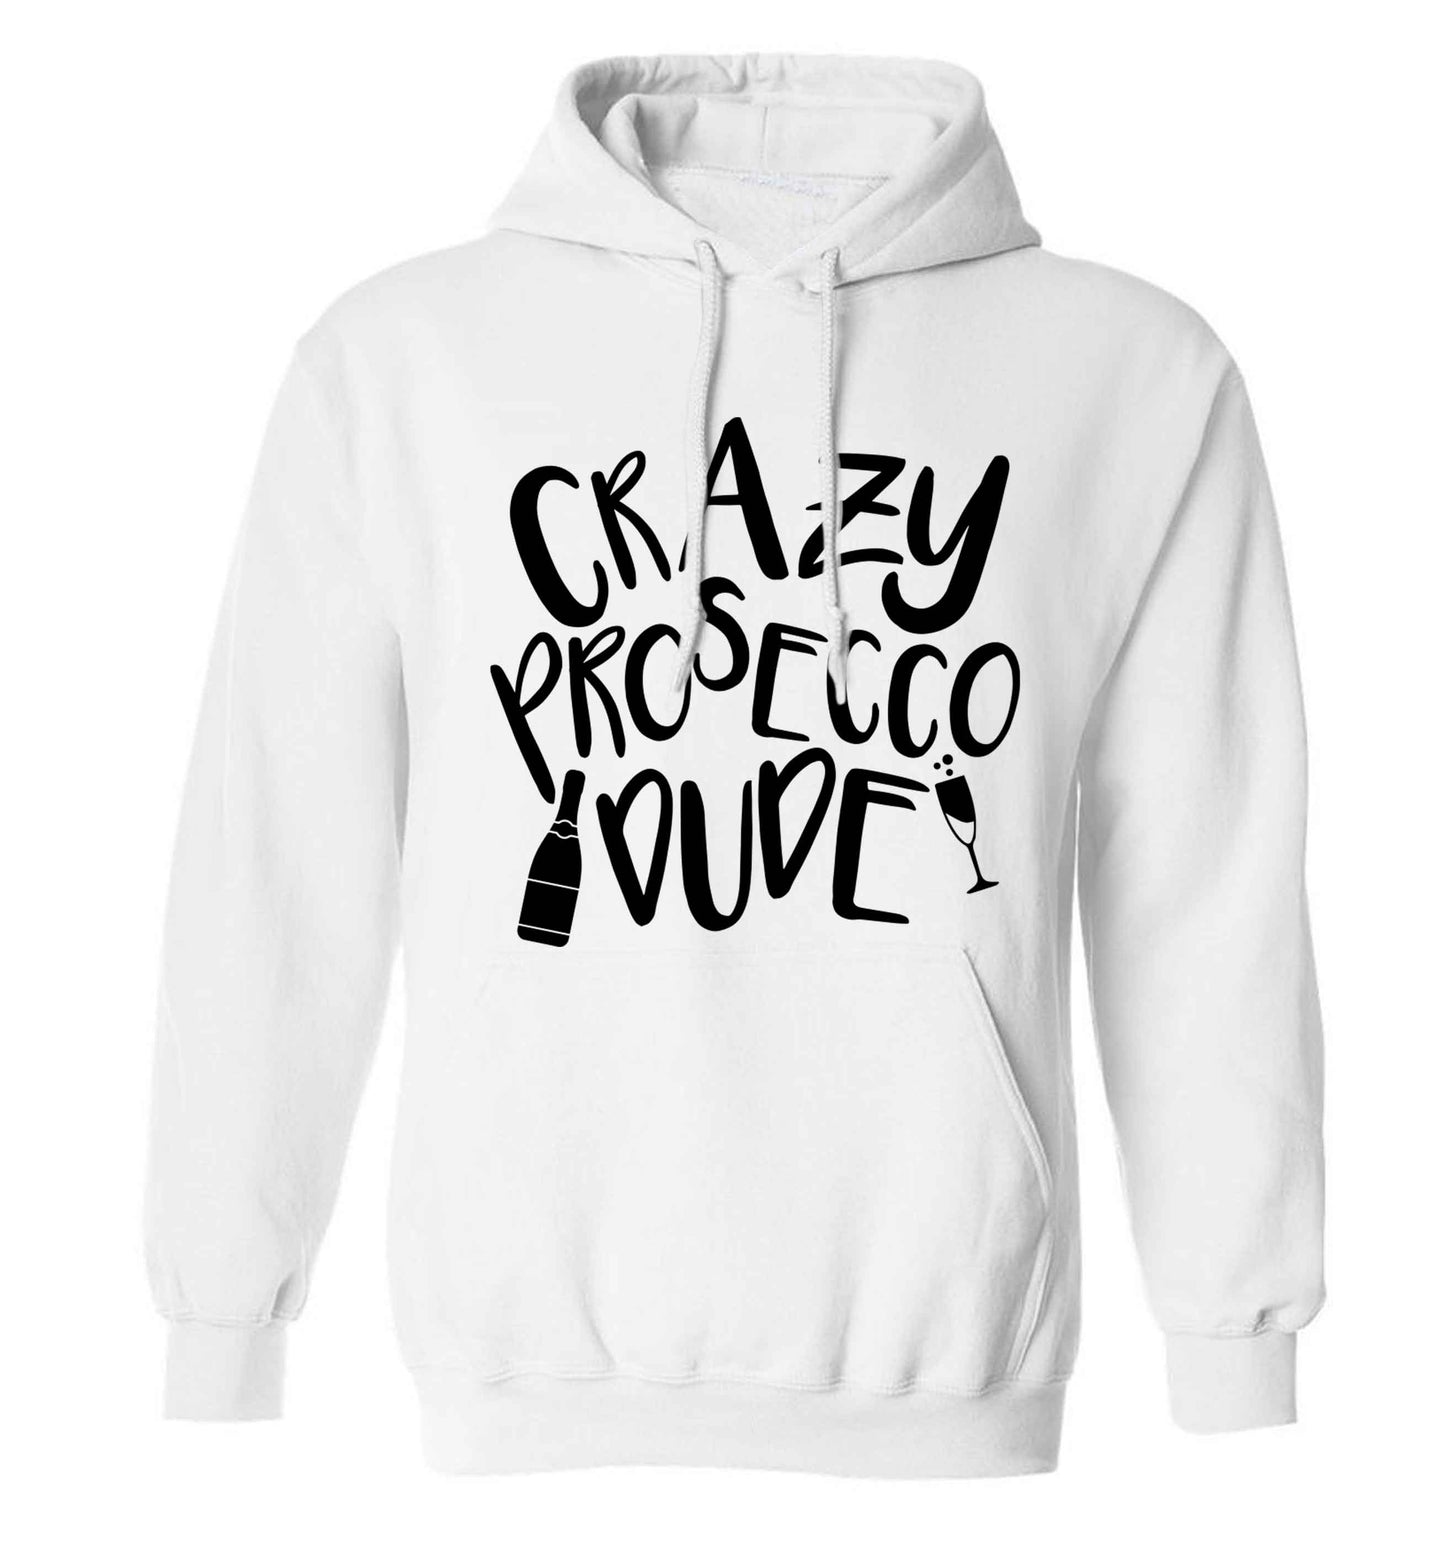 Crazy prosecco dude adults unisex white hoodie 2XL